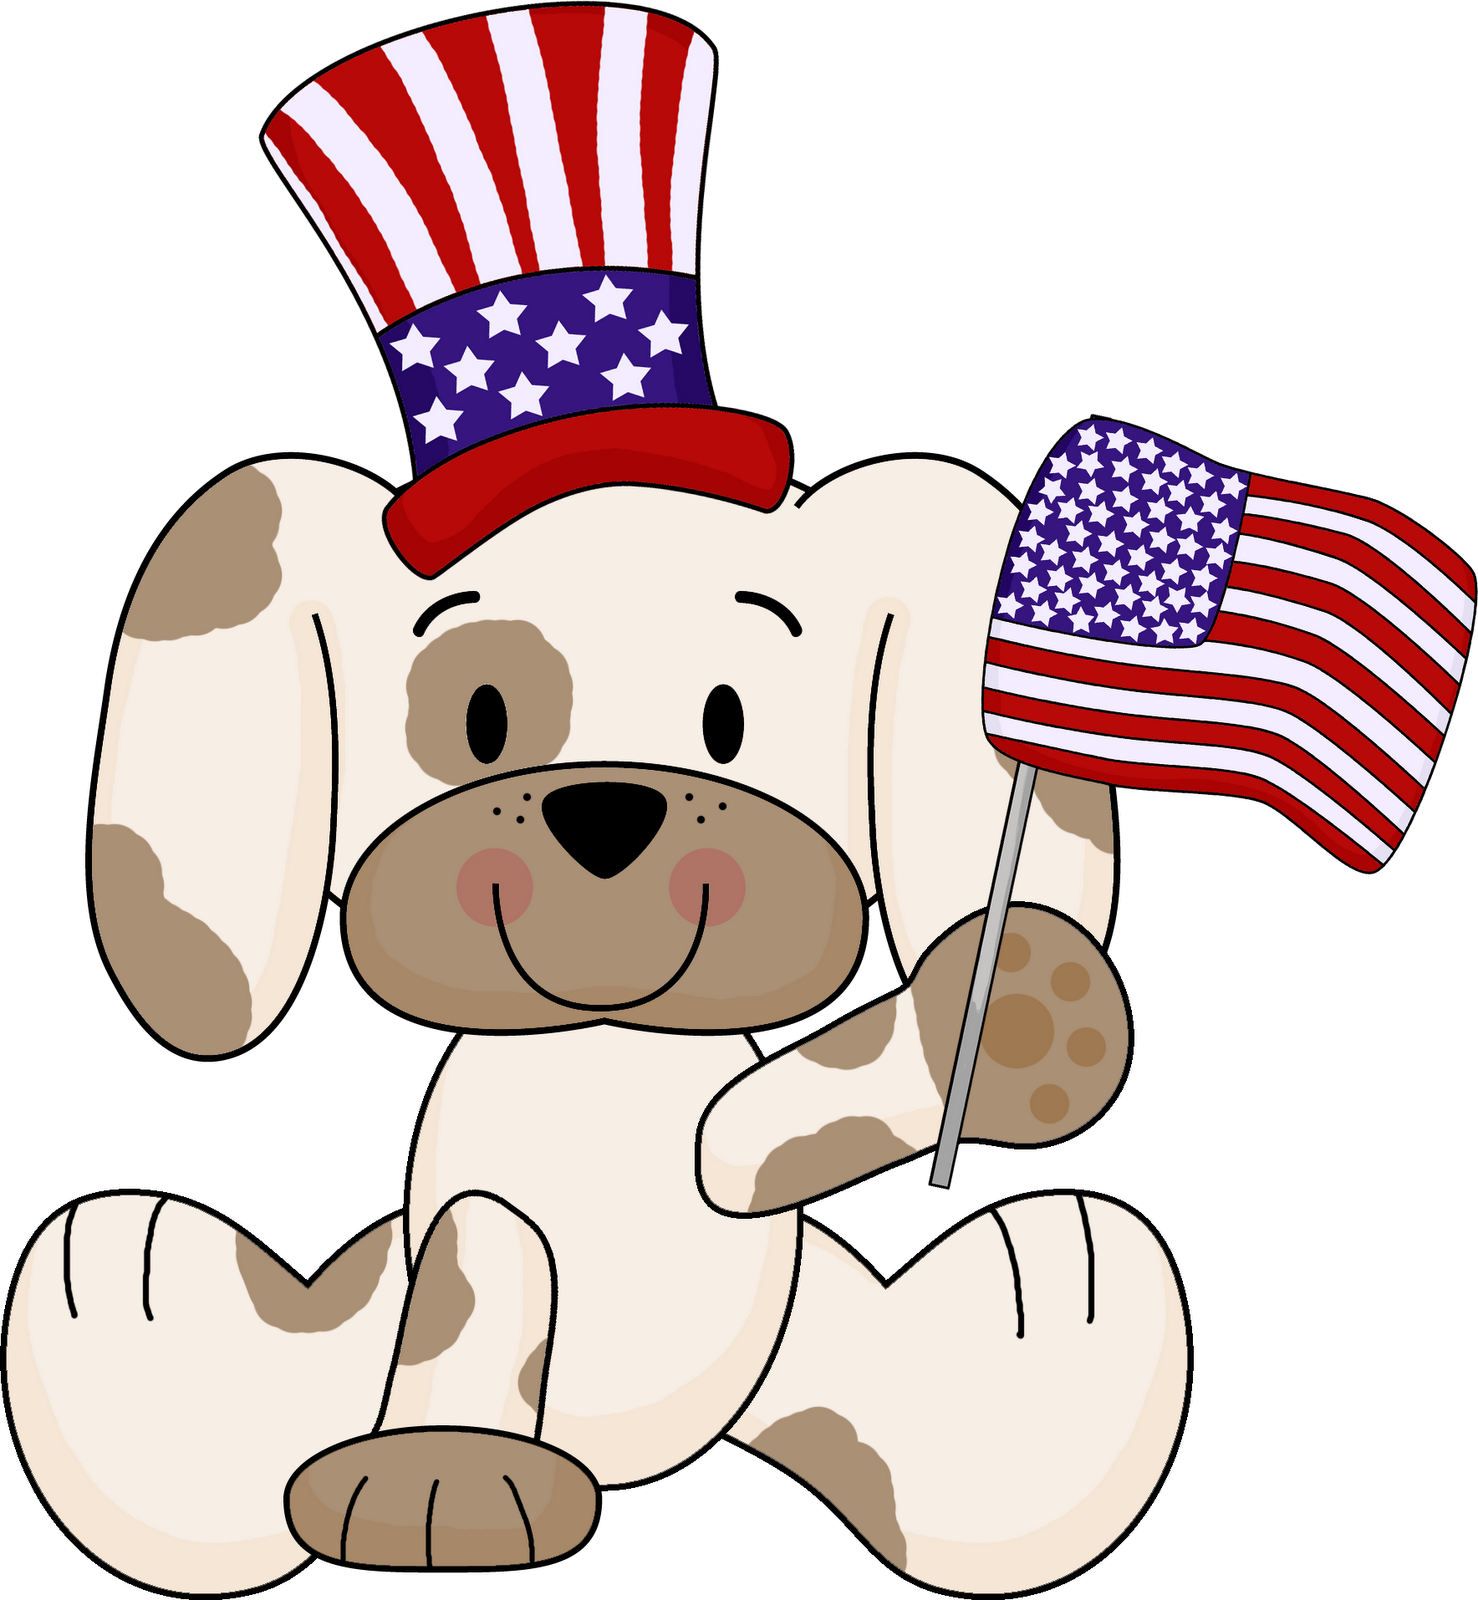 Clip art most amazing. Clipart free presidents day